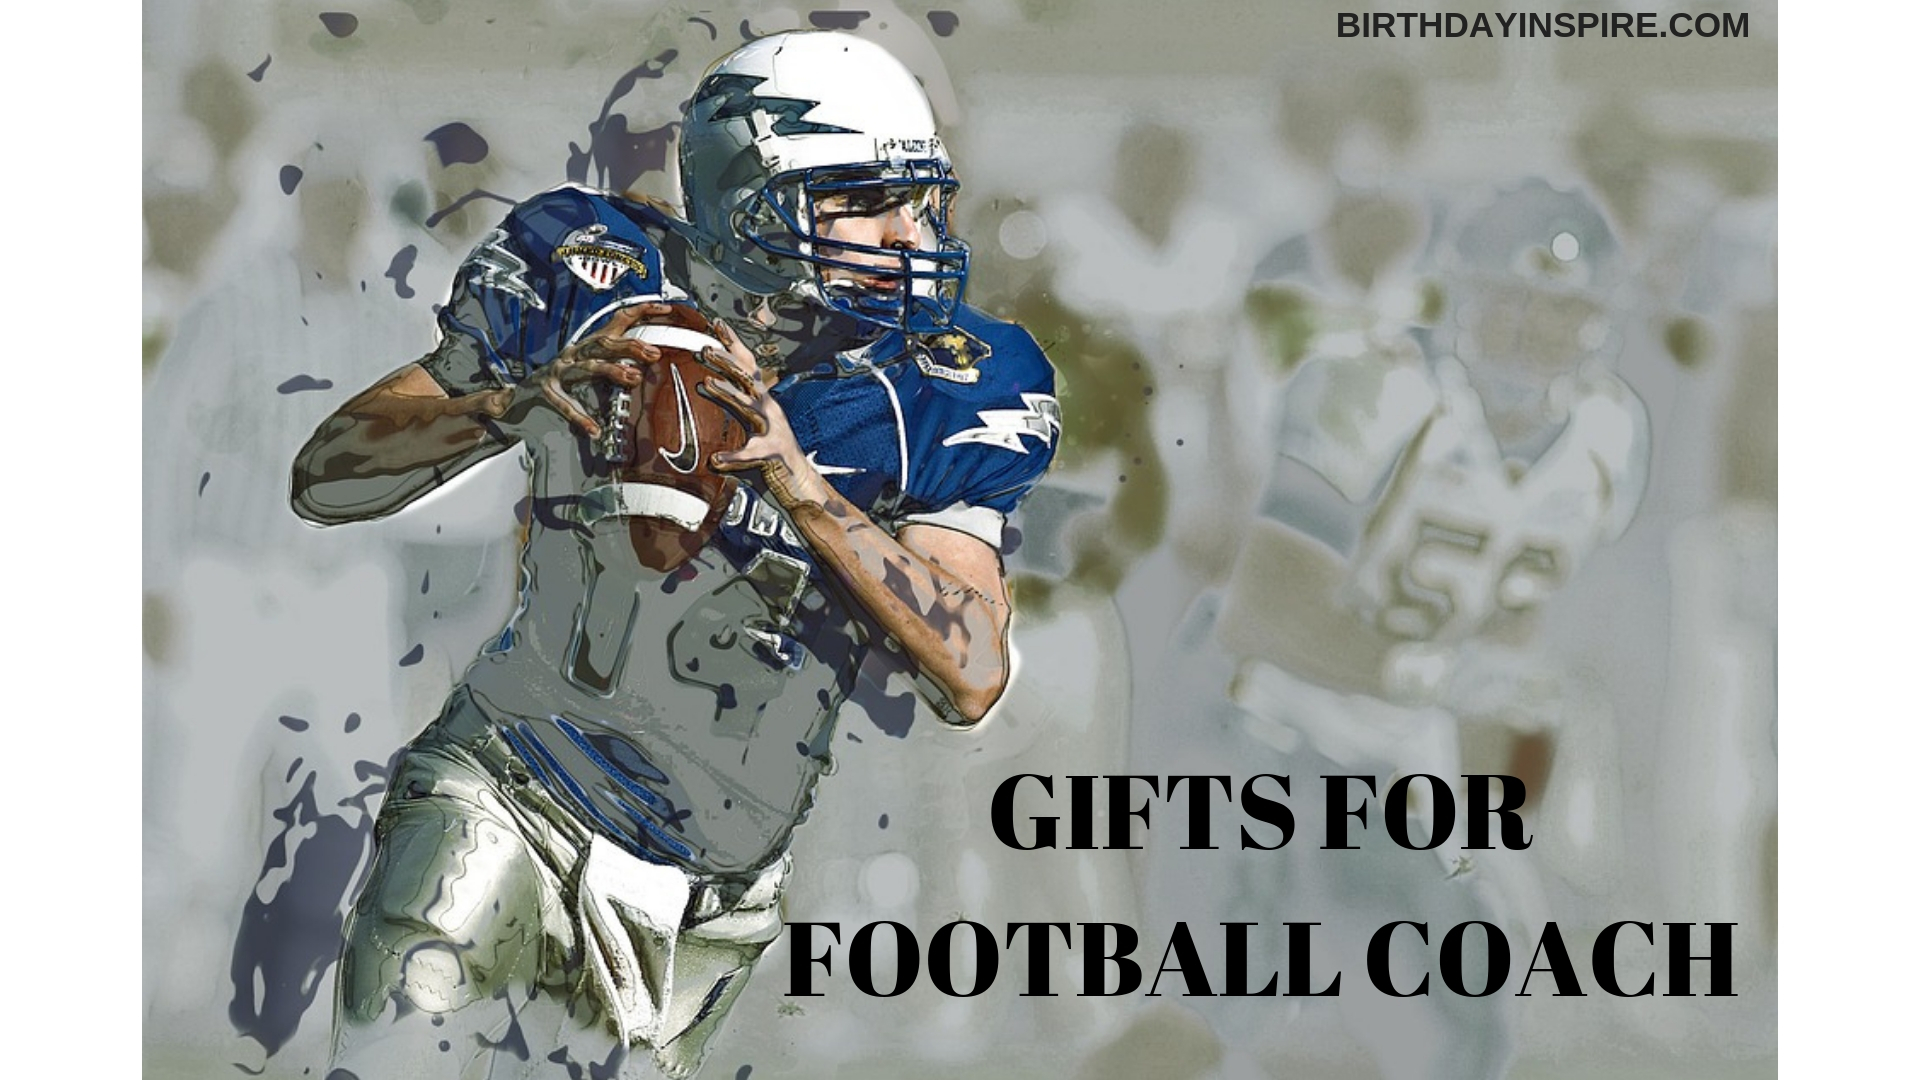 FOOTBALL COACH GIFTS